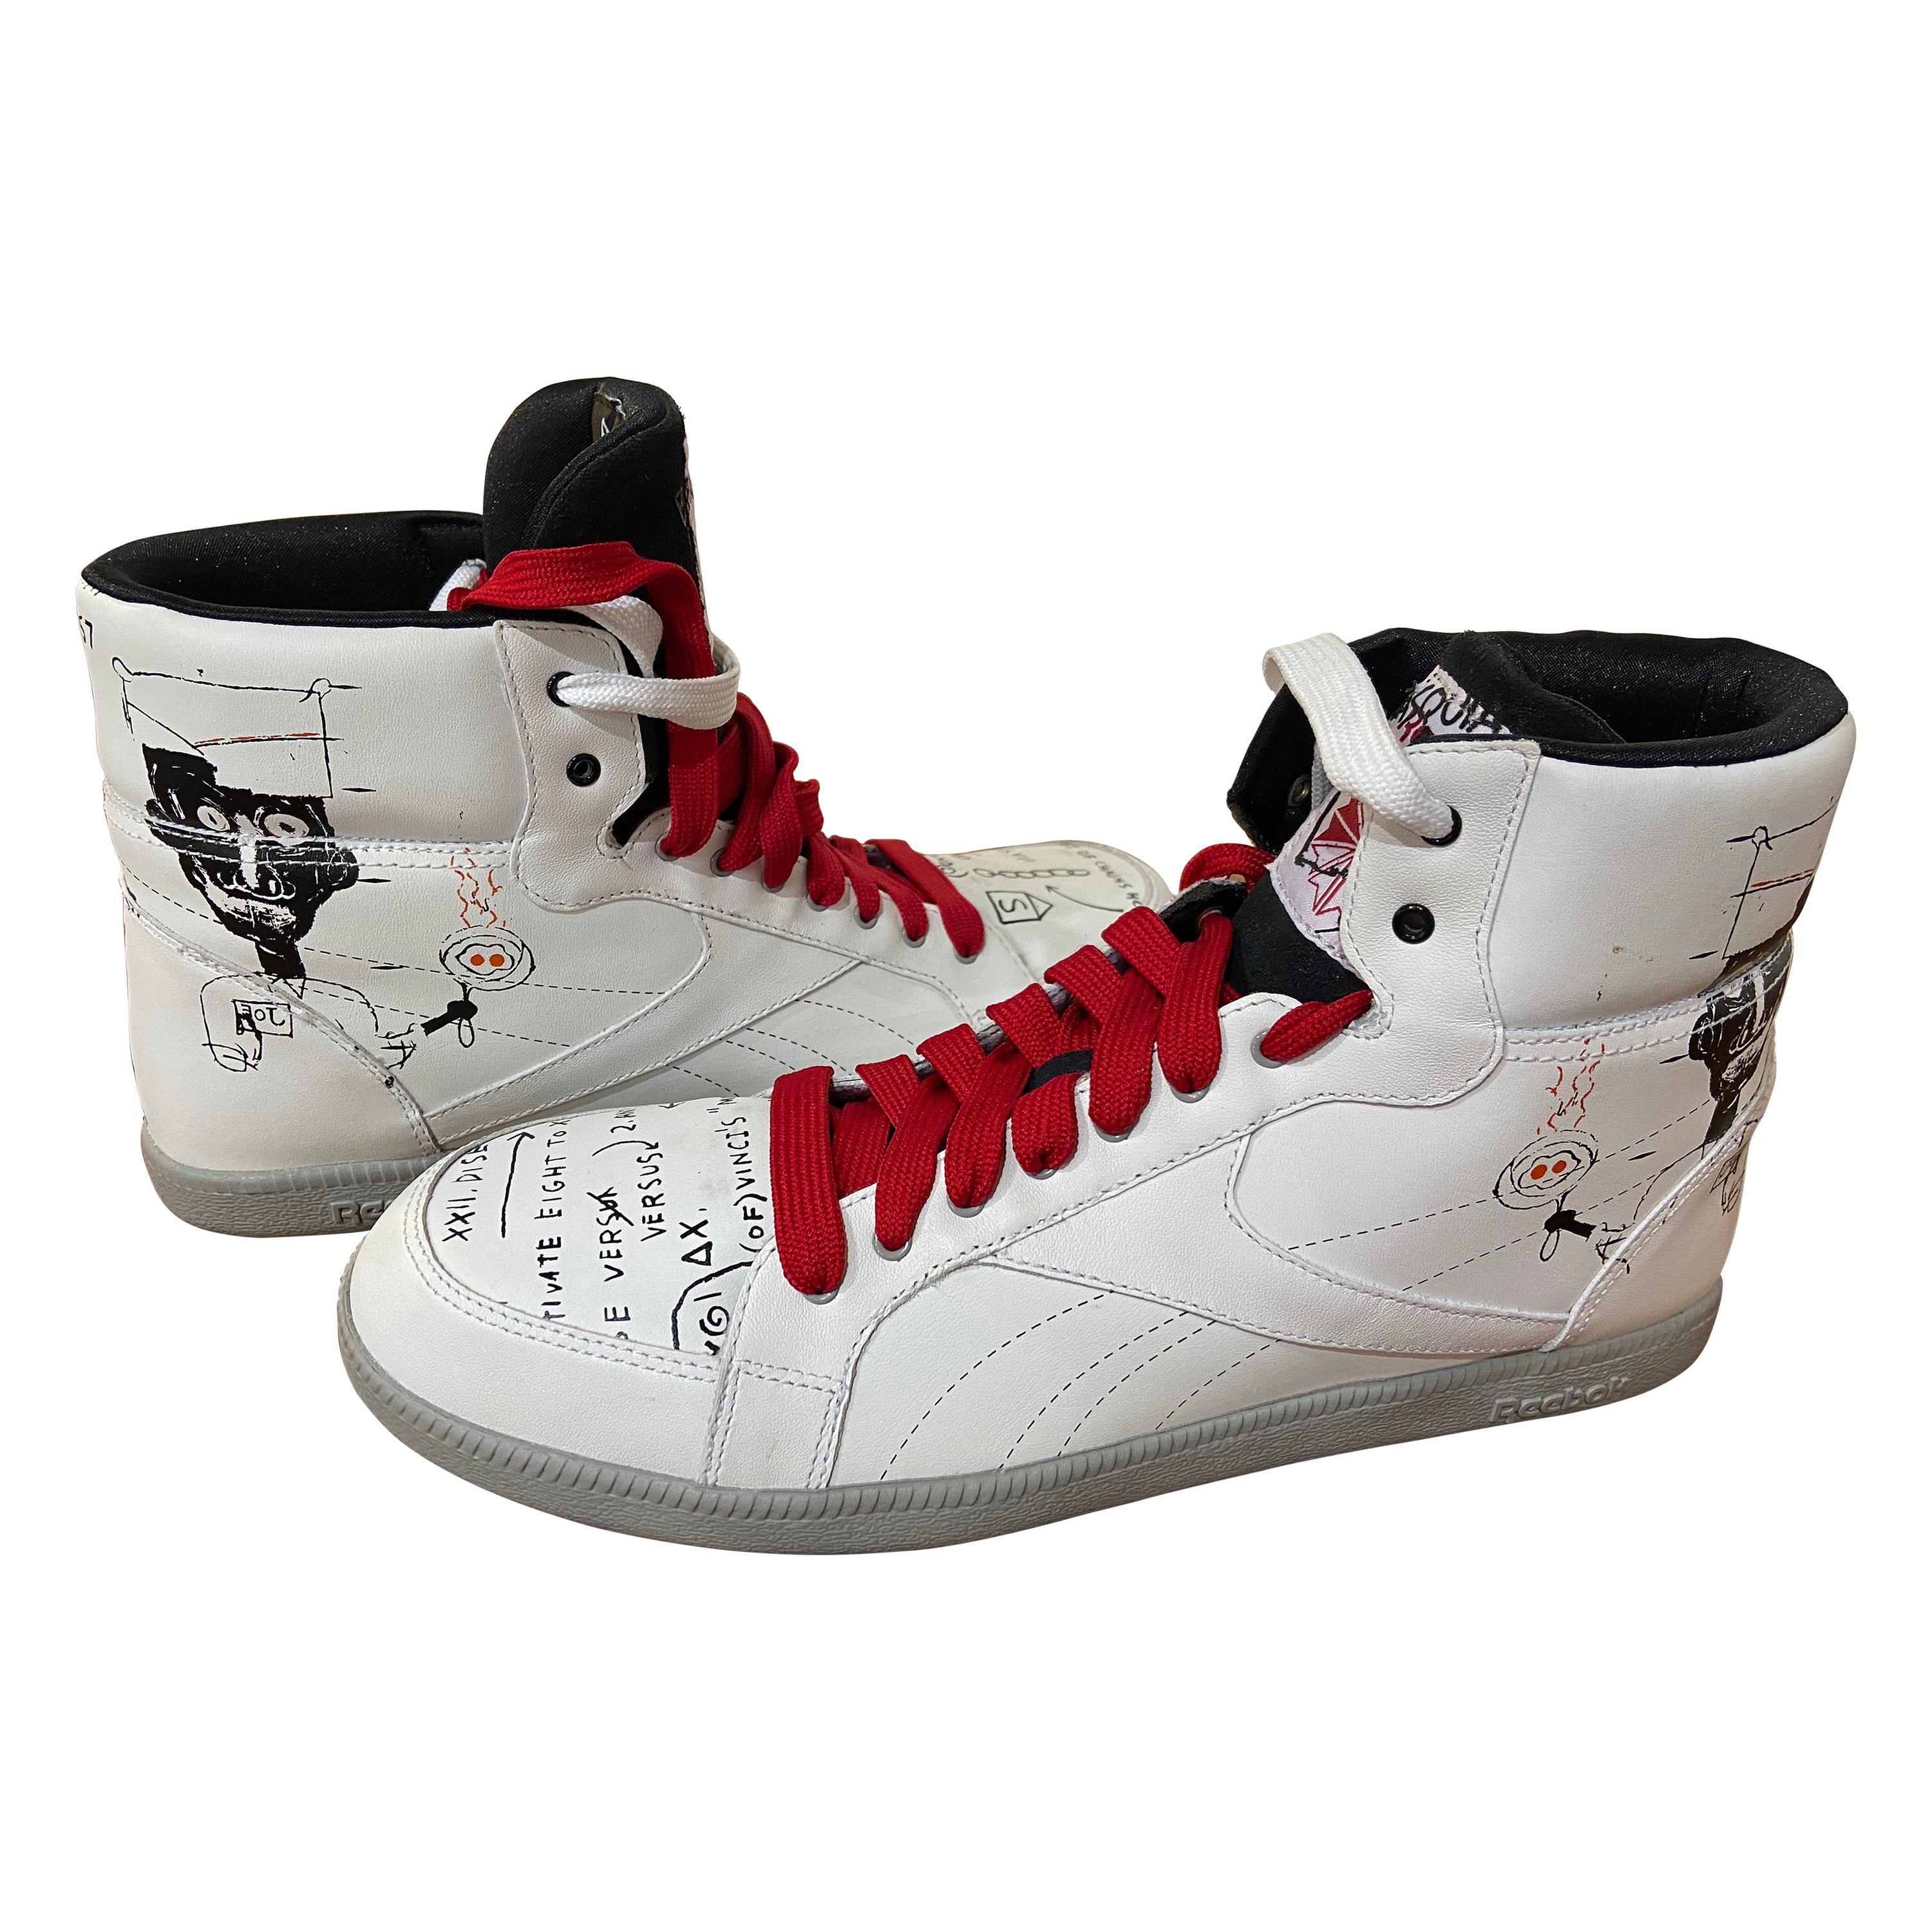 Reebok x Basquiat Sneakers Collection – White & Red, 2012